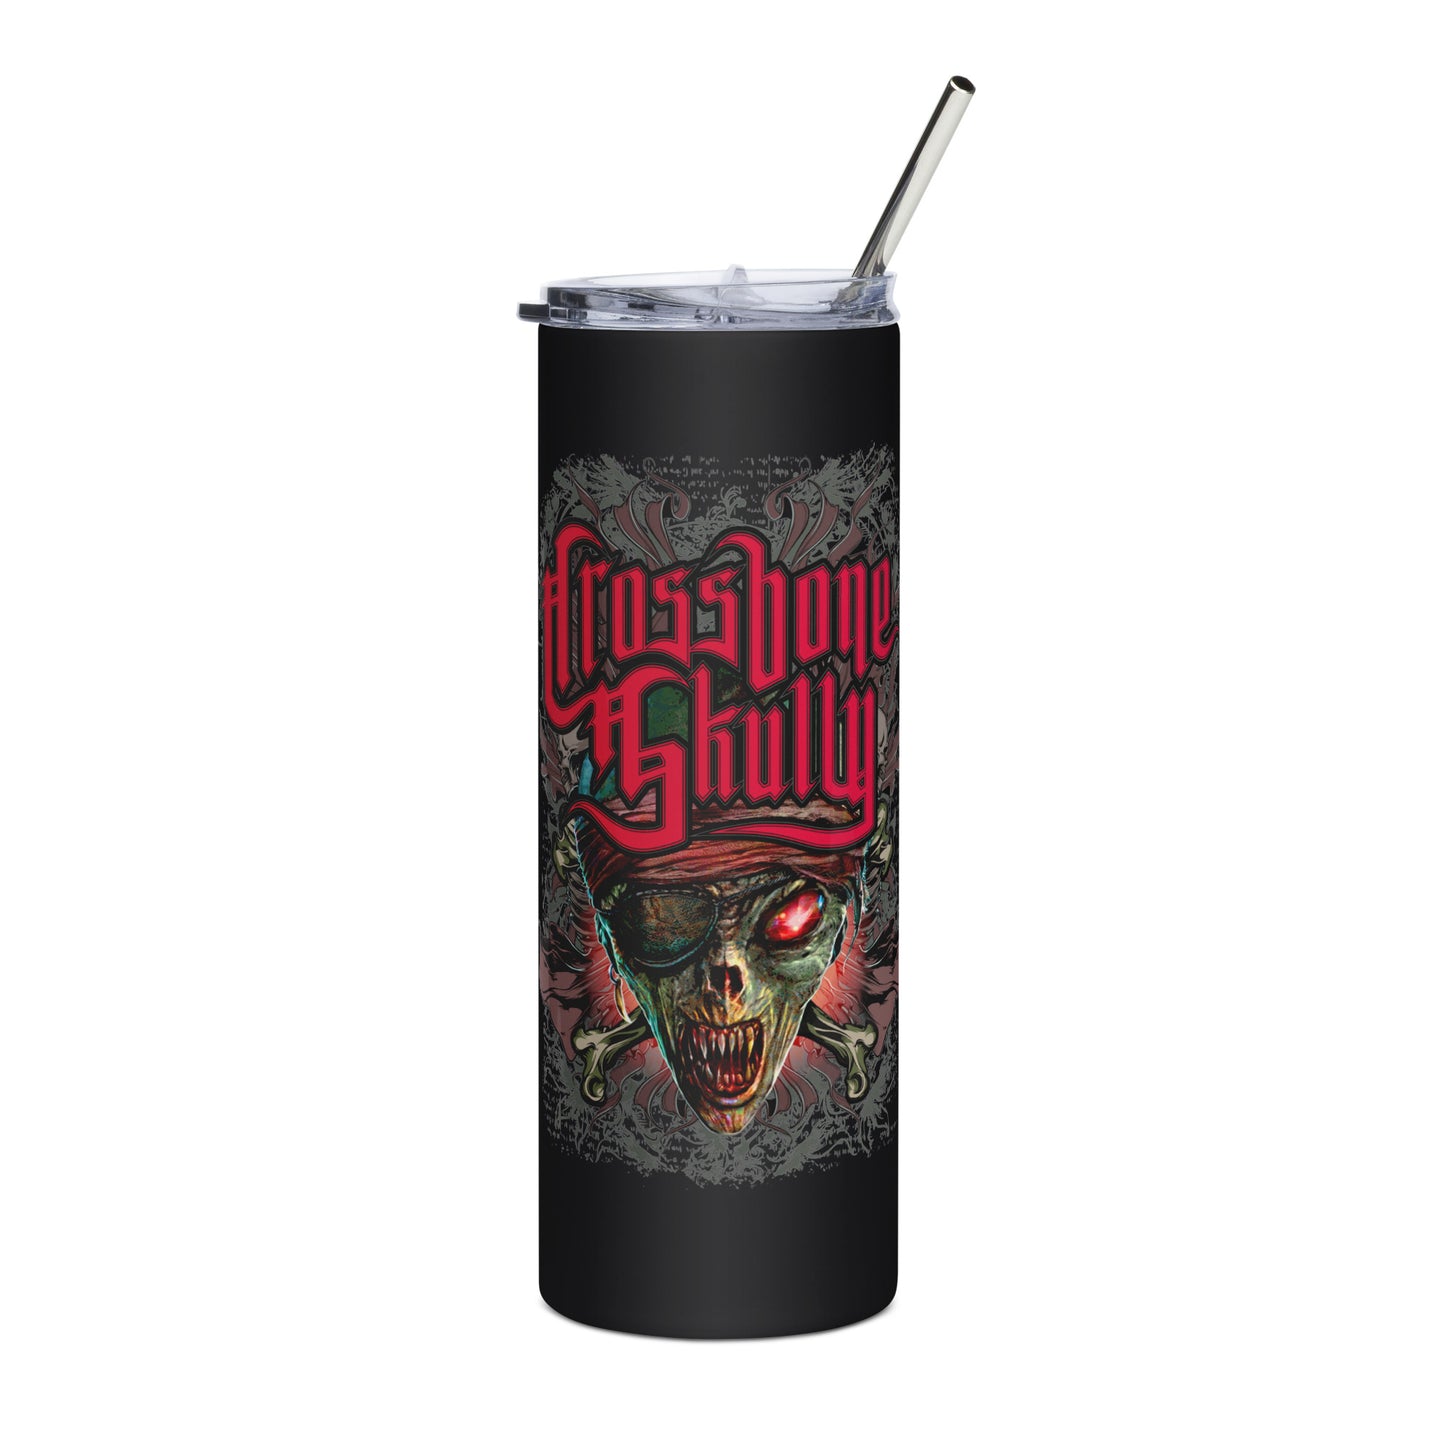 Limited Edition Skully Stainless Steel Tumbler